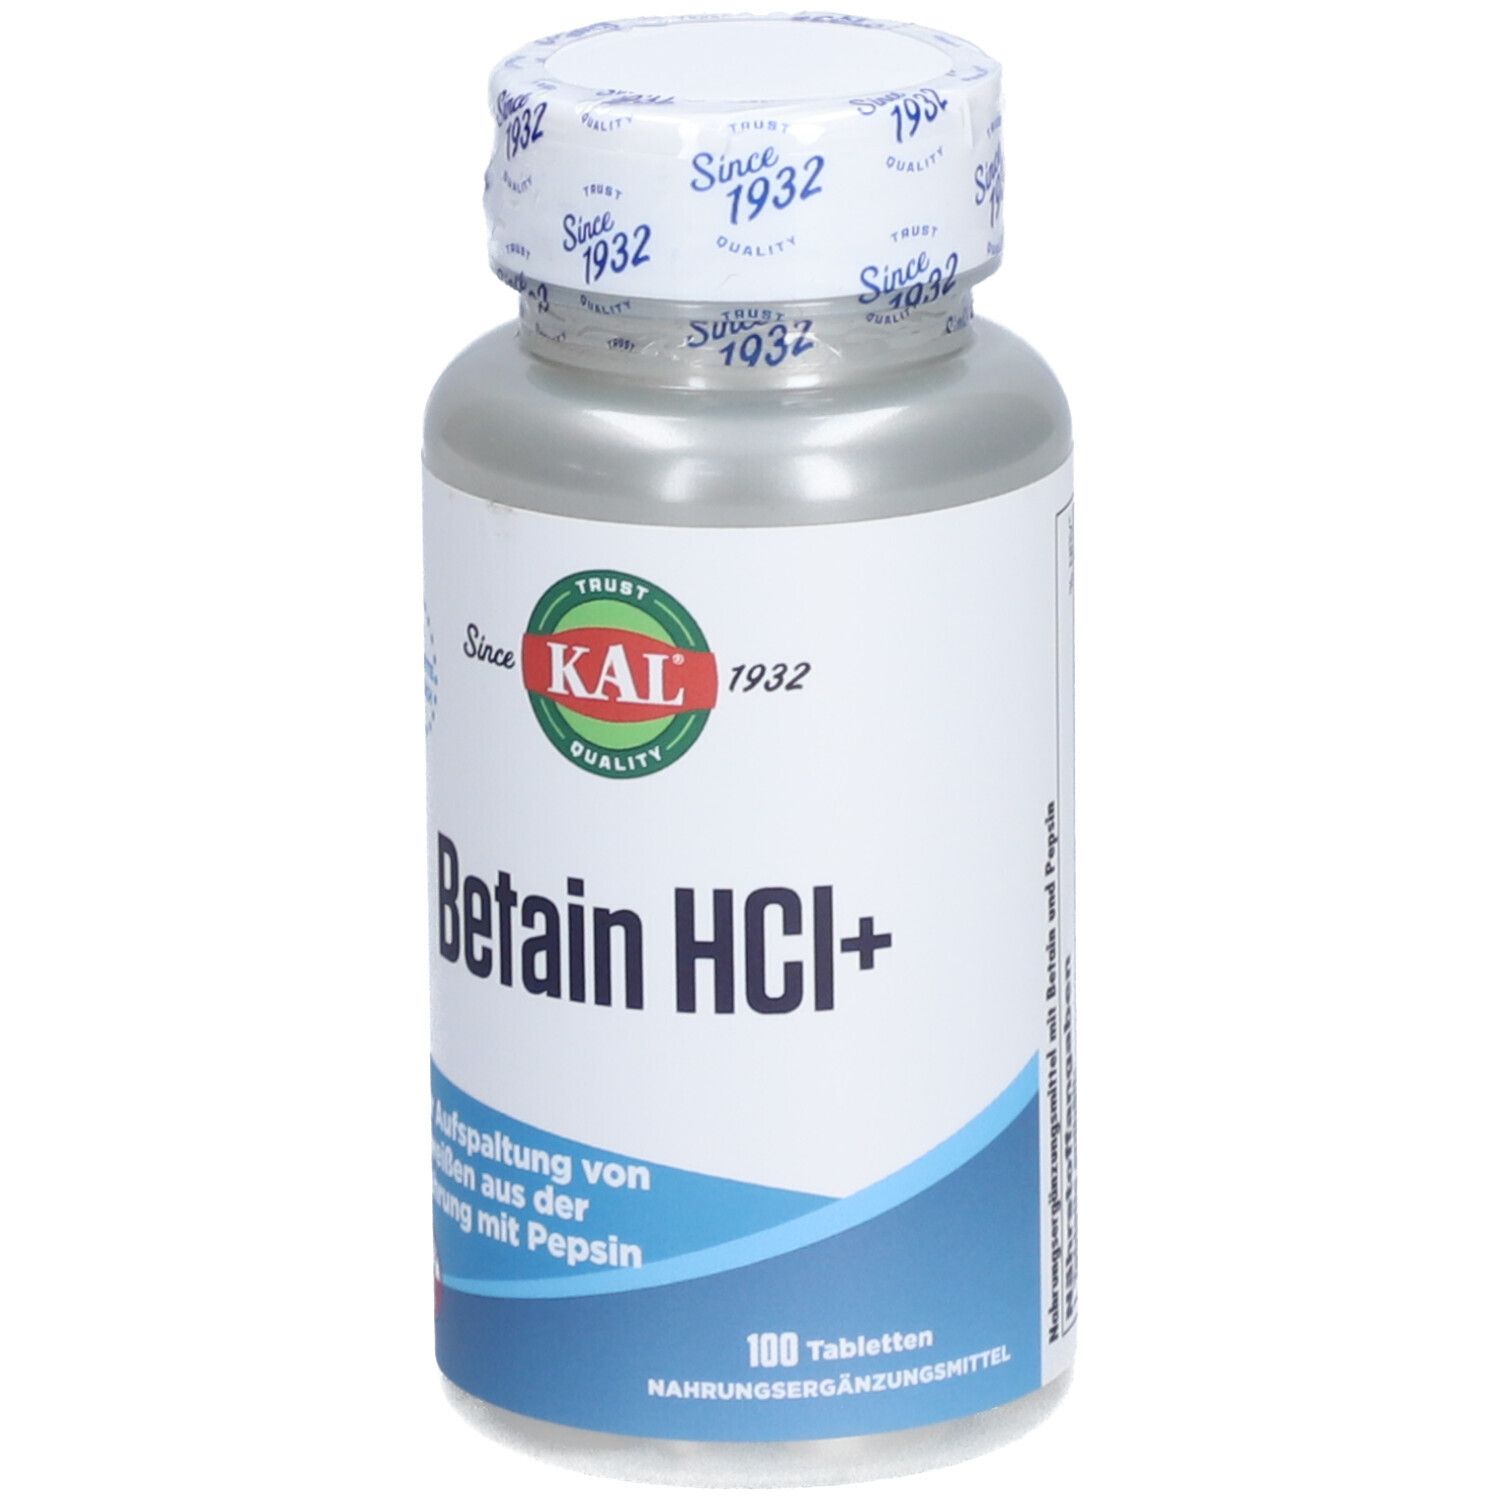 KAL Betain HCL Complex